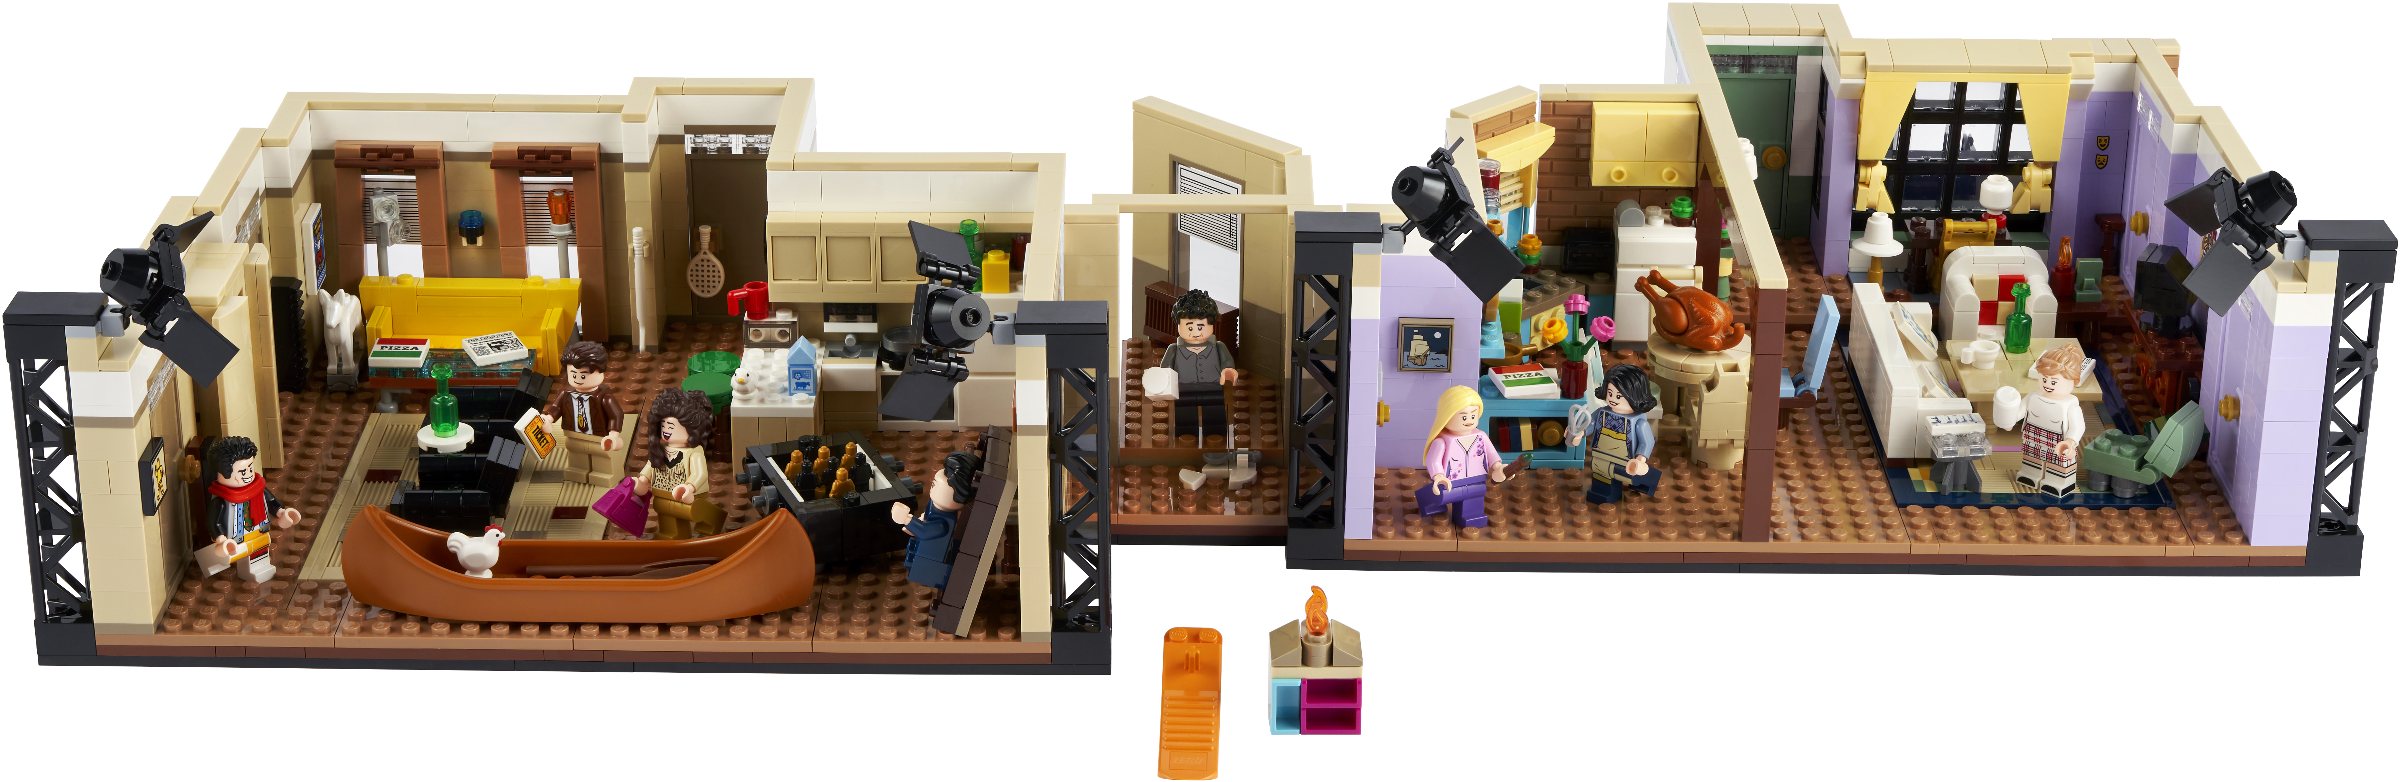 NEW LEGO FRIENDS MINIFIGURES - Split from 21319 - Central Perk